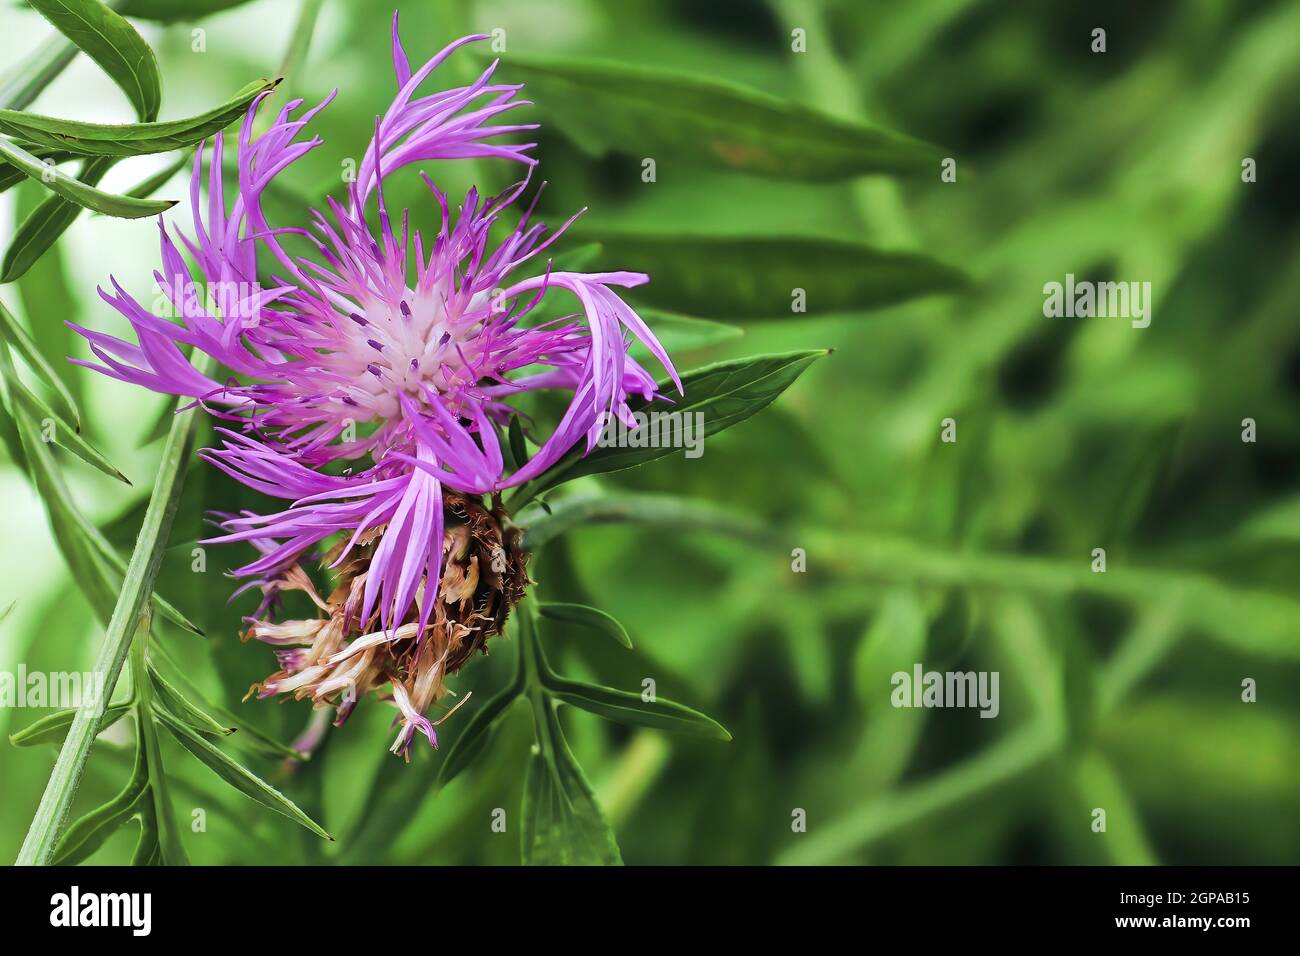 Spiraled pink petals on a knapweed flower. Stock Photo